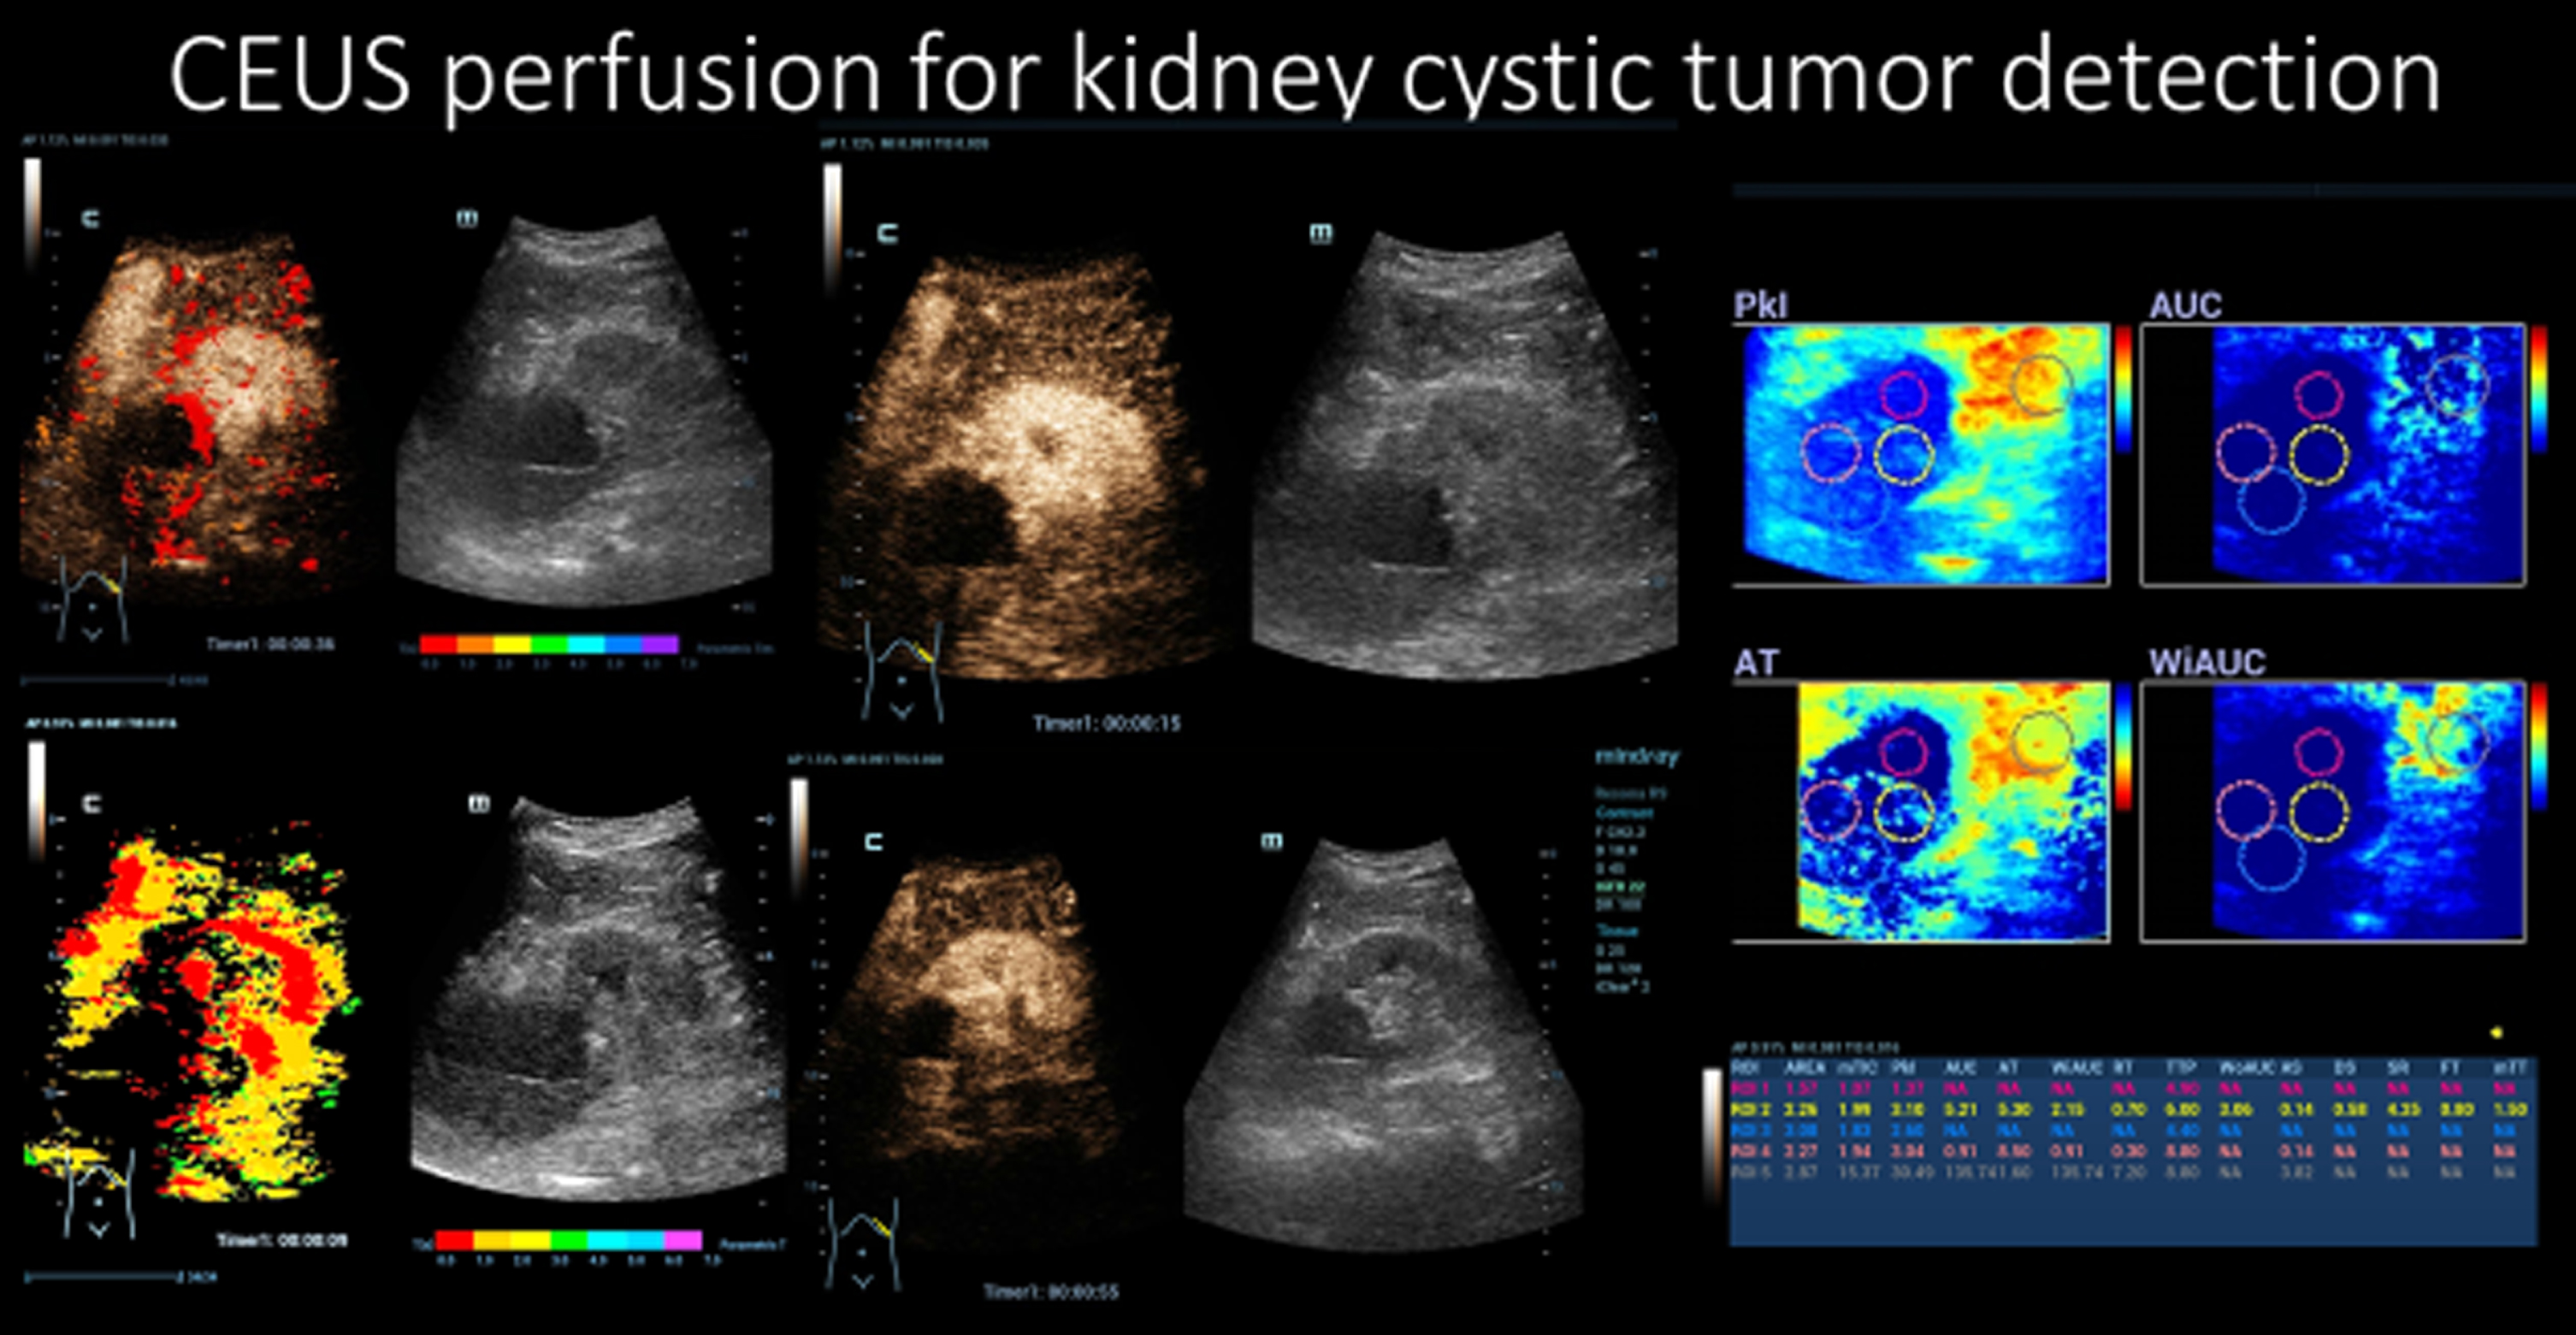 CEUS perfusion for the detection of a small intracystic kidney tumor.